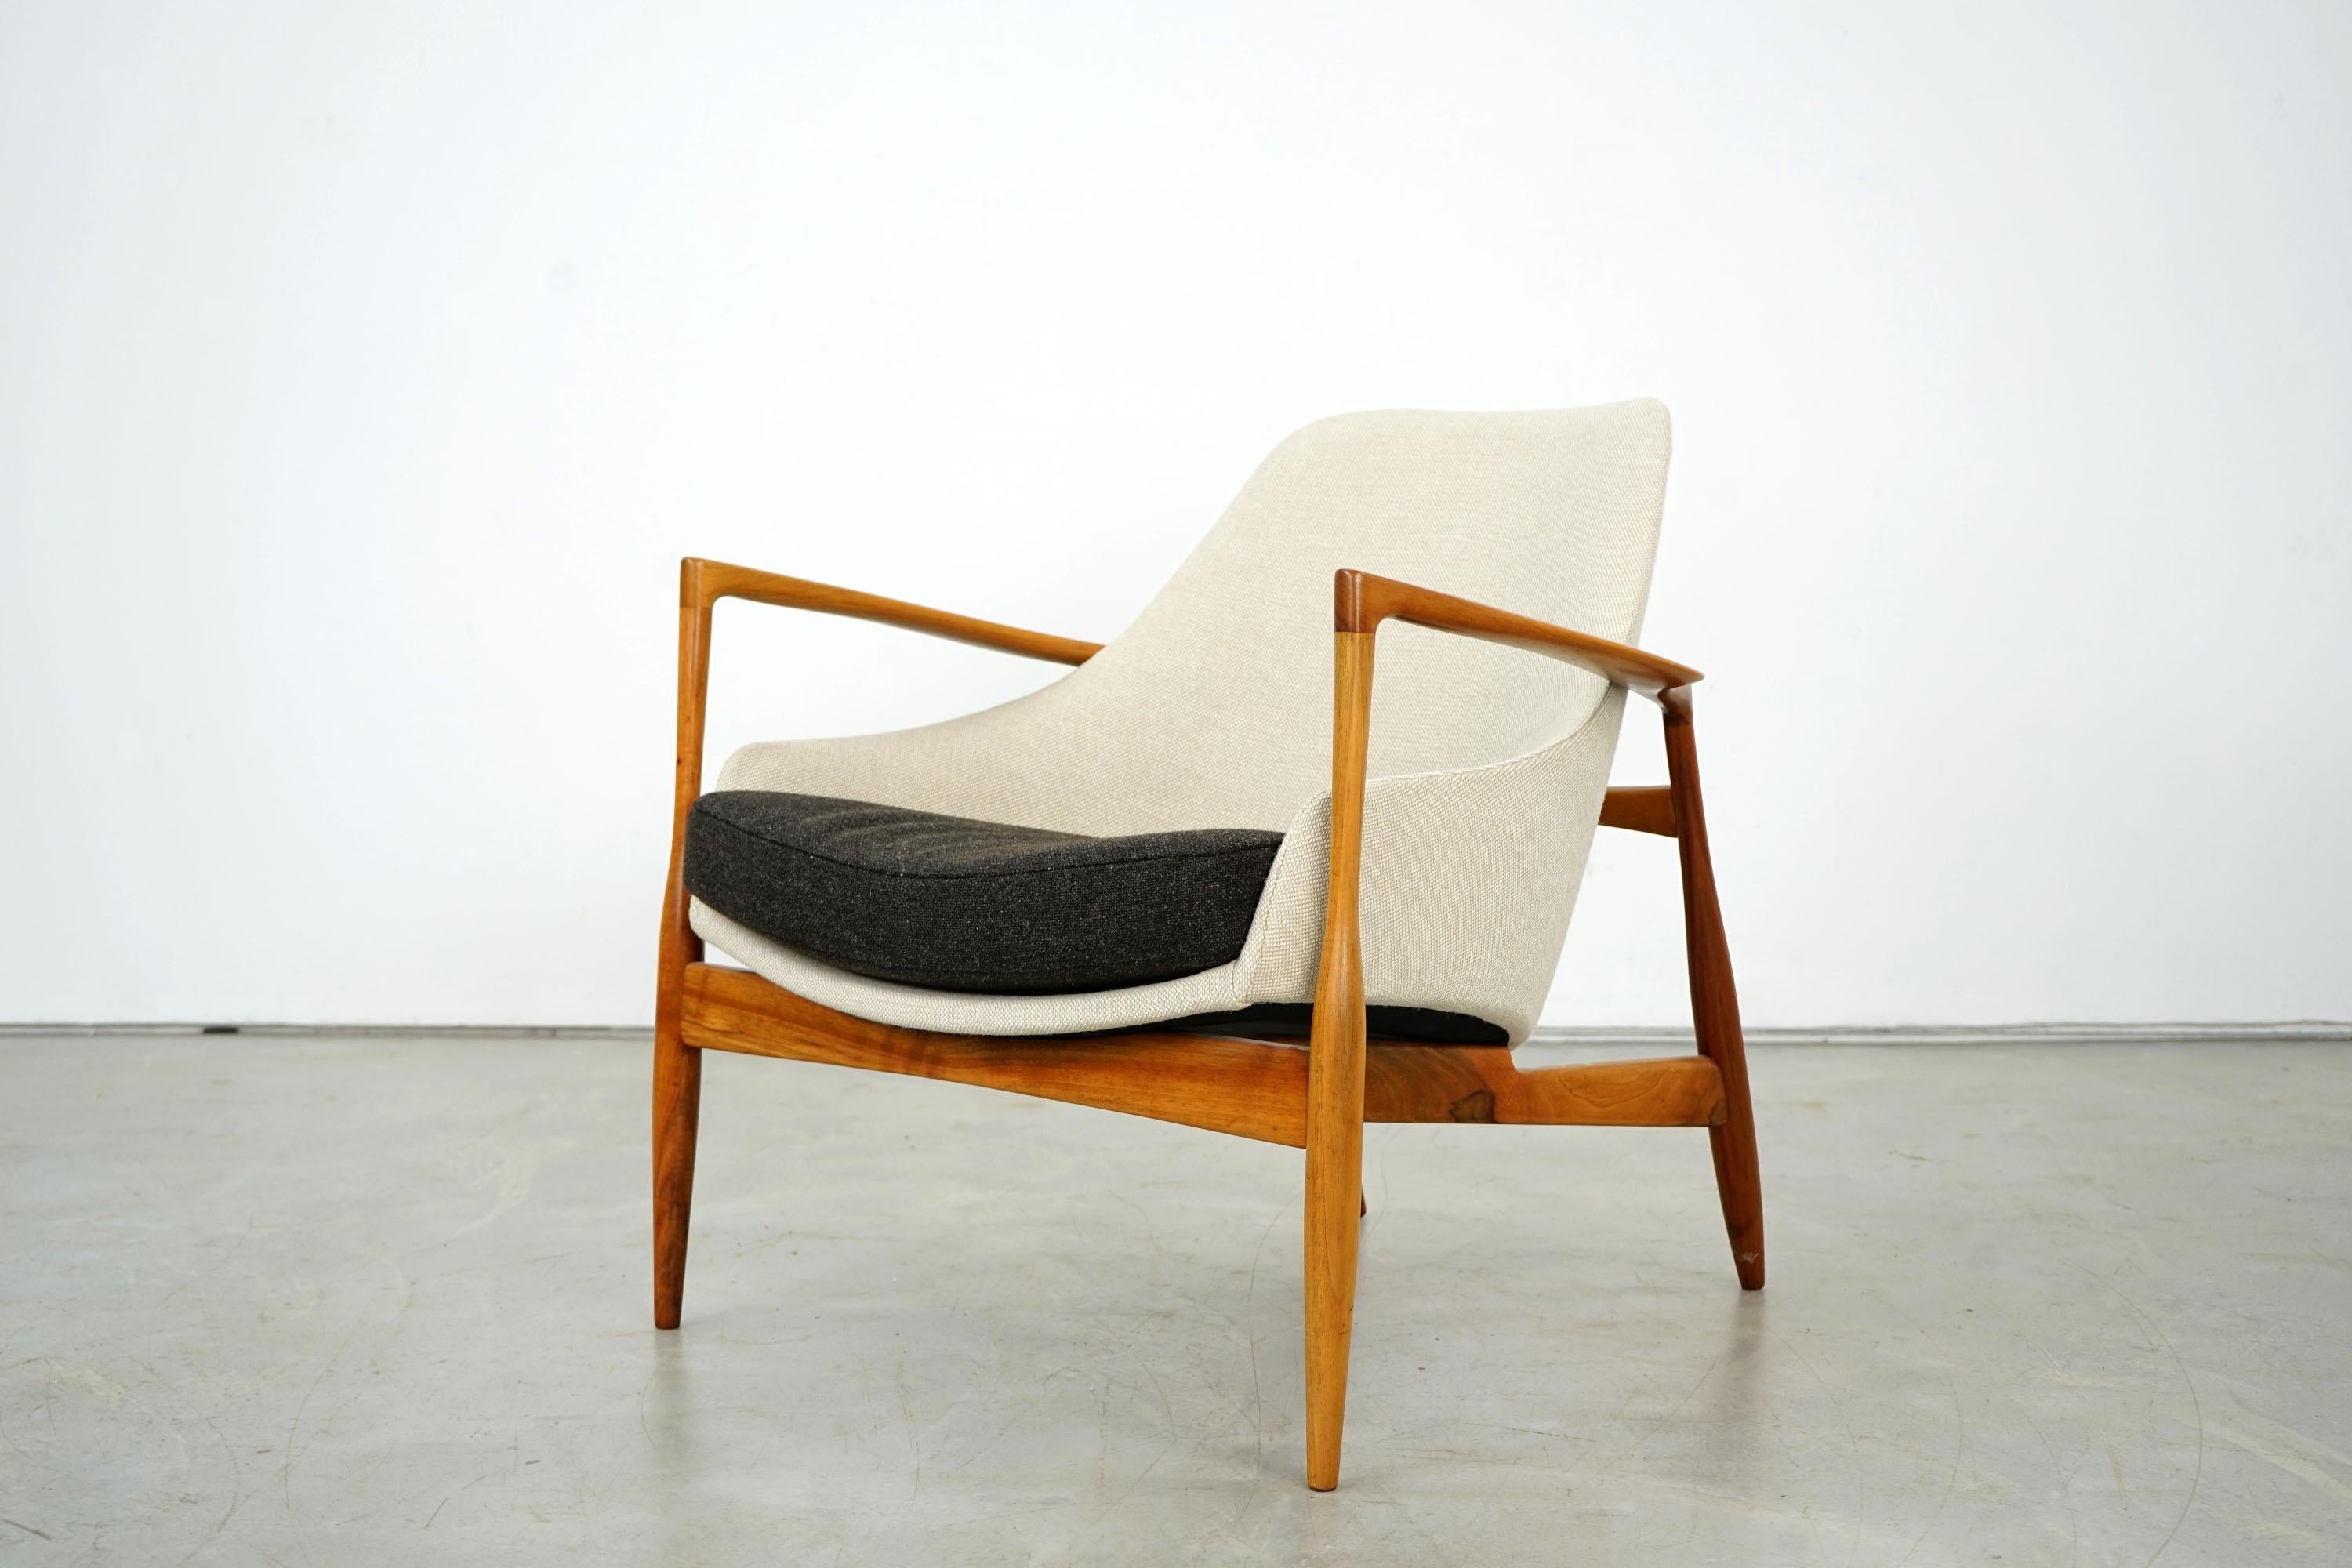 Ib Kofod-Larsen re-designed his version of the Elizabeth Group in 1958 for the German manufacturer Laauser. Armchair 